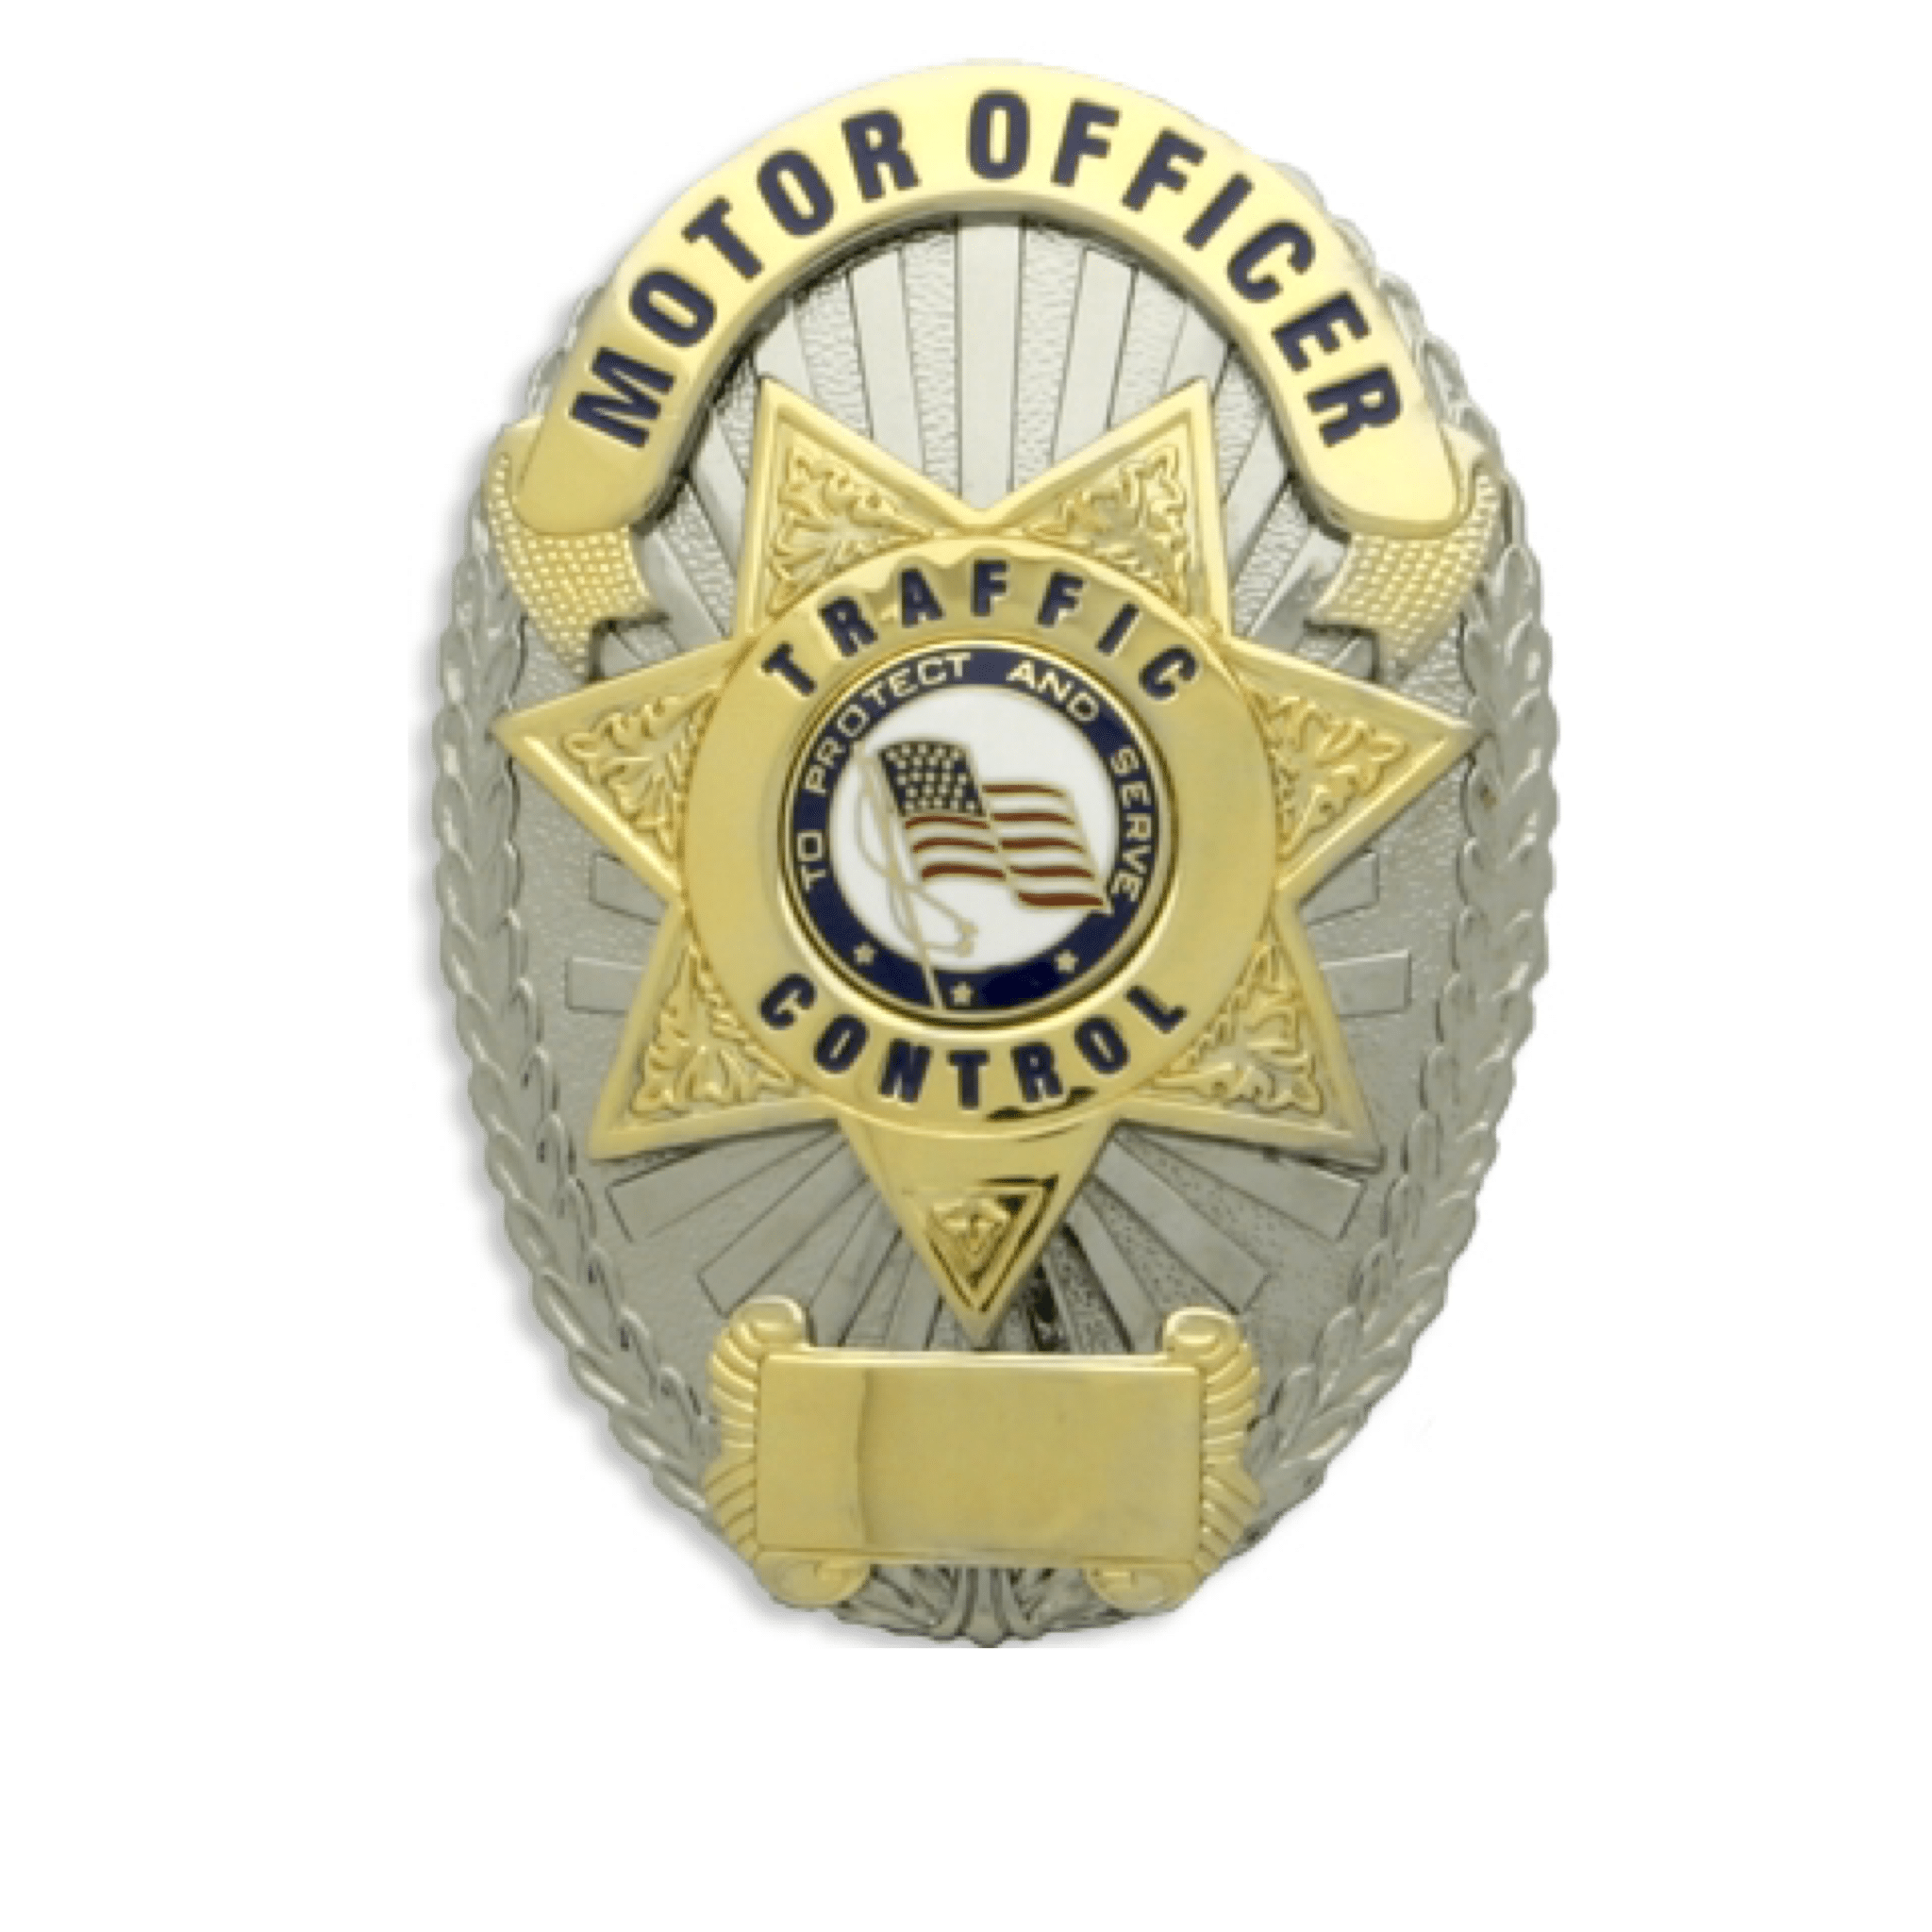 Motor Officer Logo - Motor Officer Badge (Oval Shield) - West Coast Uniforms and Accessories